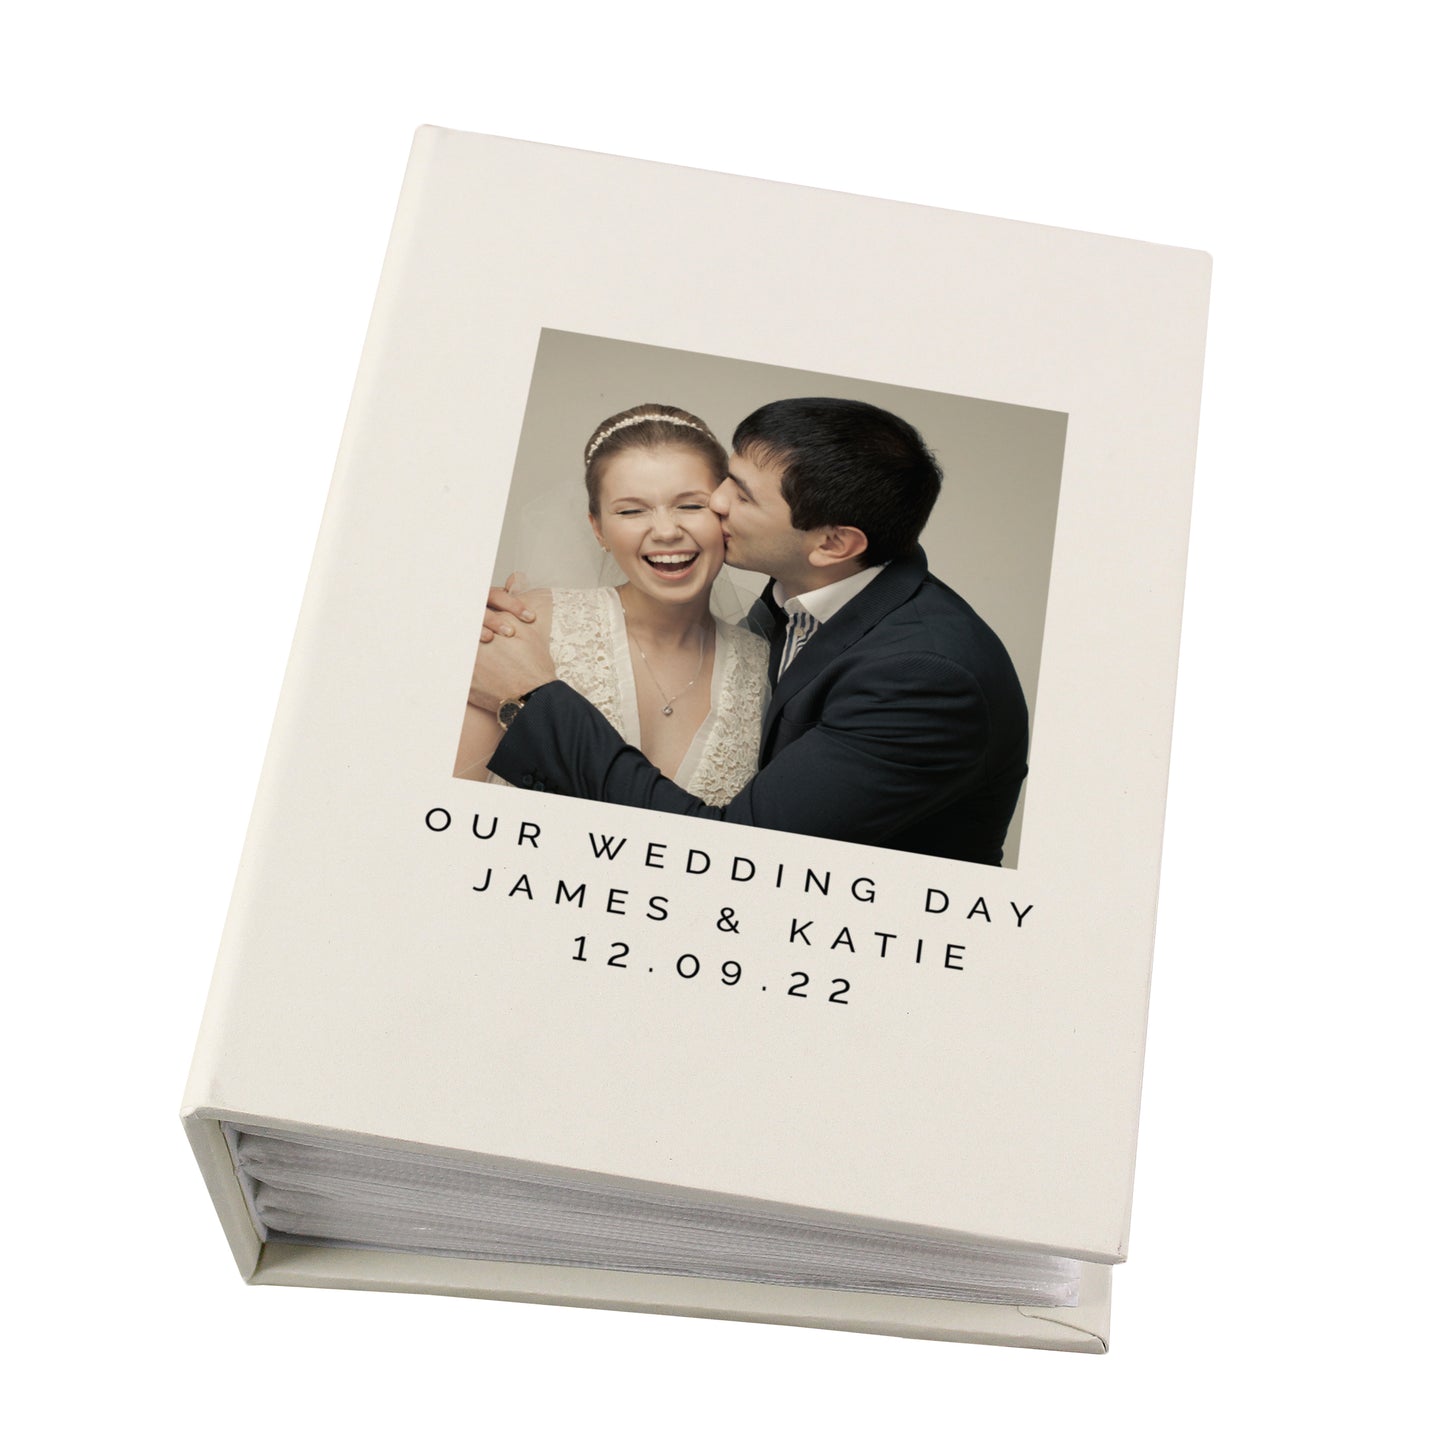 Personalised Photo Upload 6x4 Photo Album Book with Sleeves